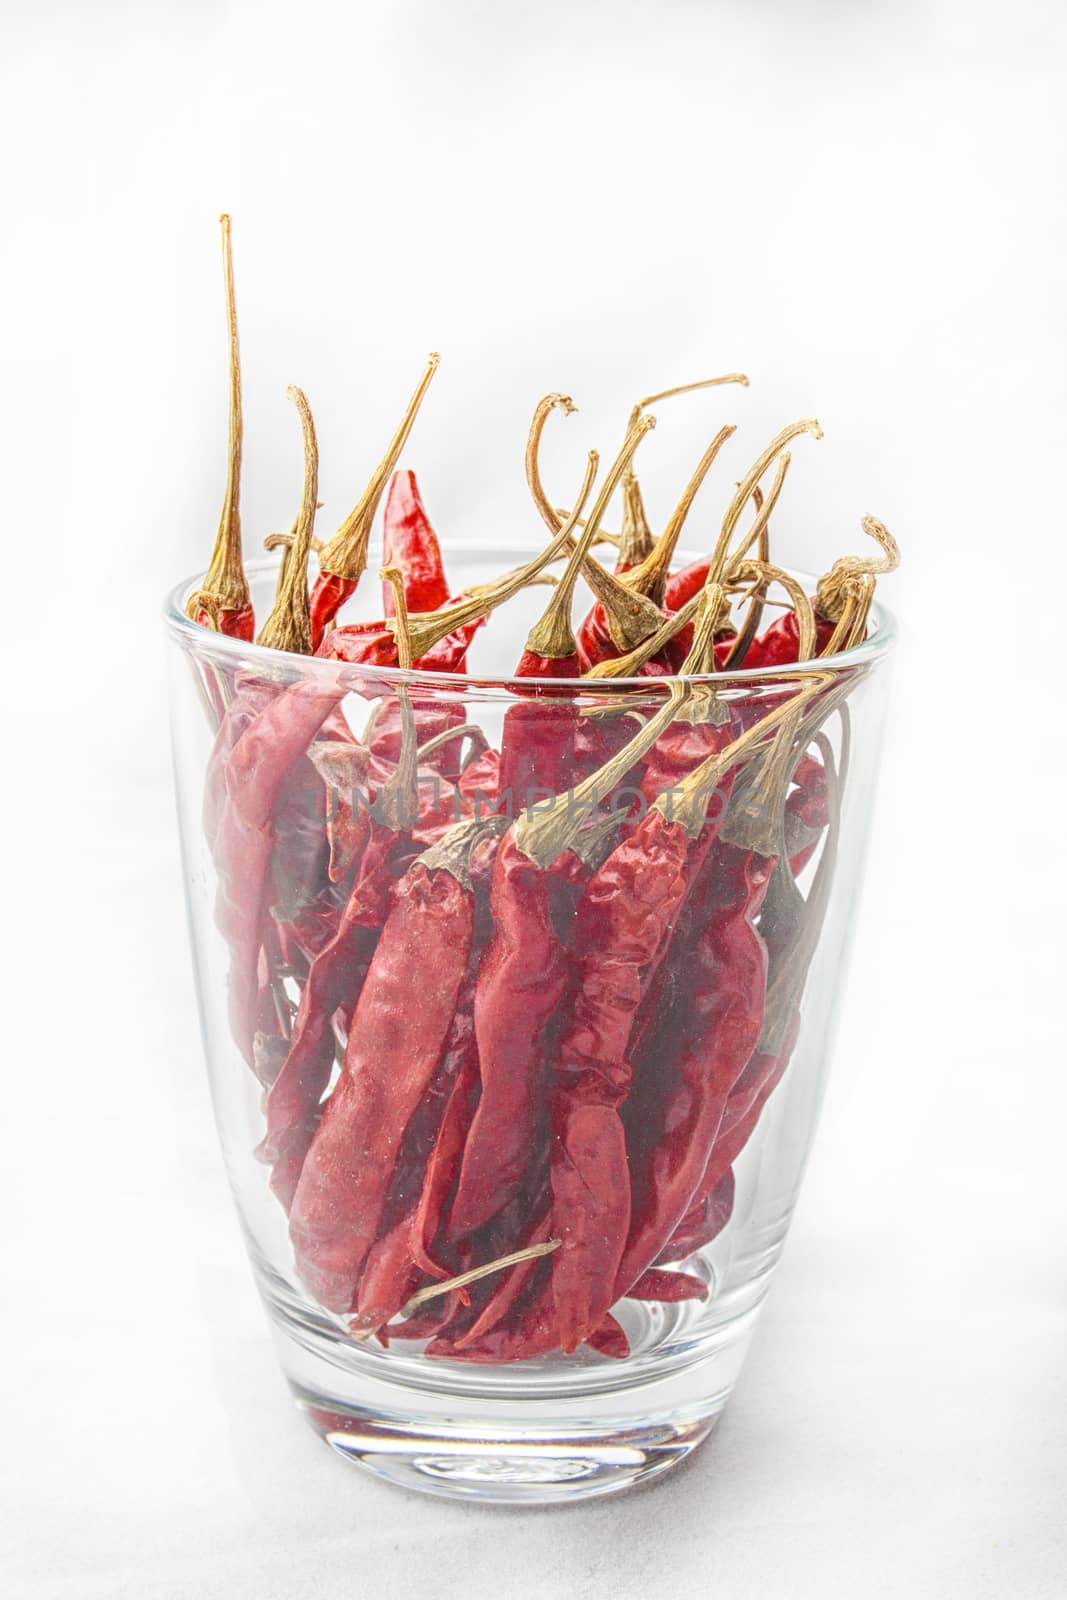 Dried red chili pepper in glass isolated on white background by nopparats